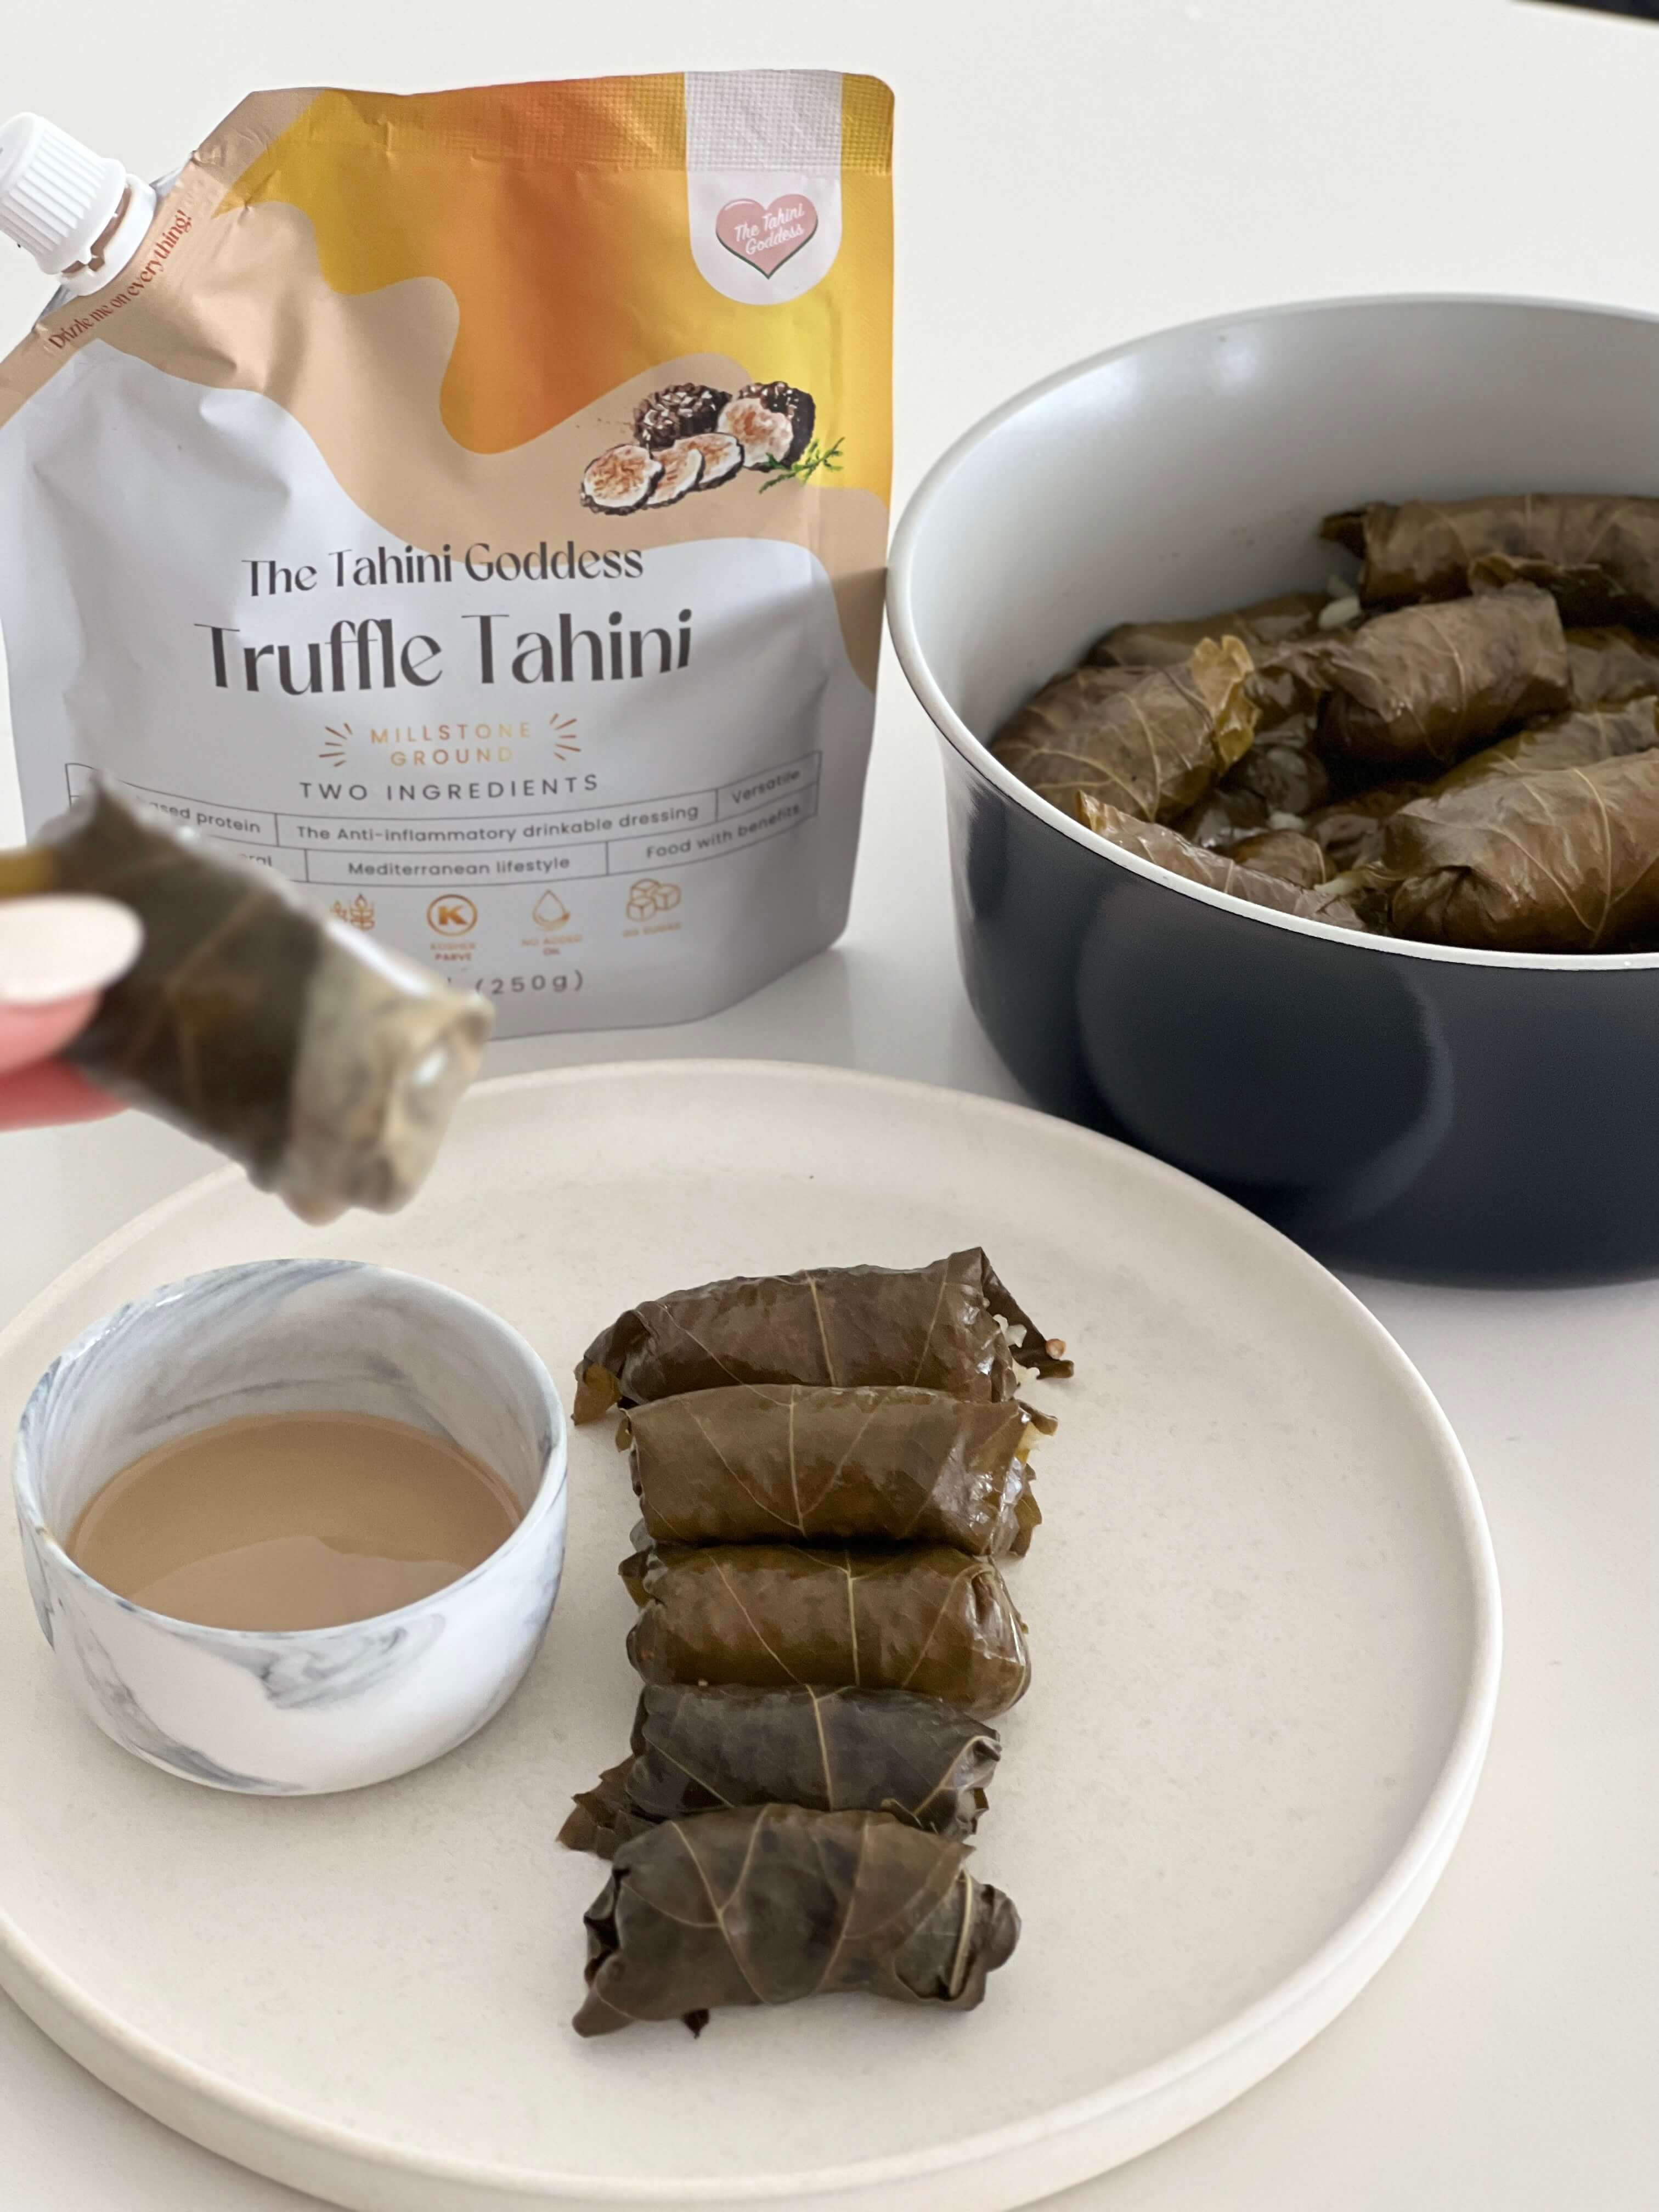 Stuffed Grape Leaves: From My Childhood to My Daughter's Plate